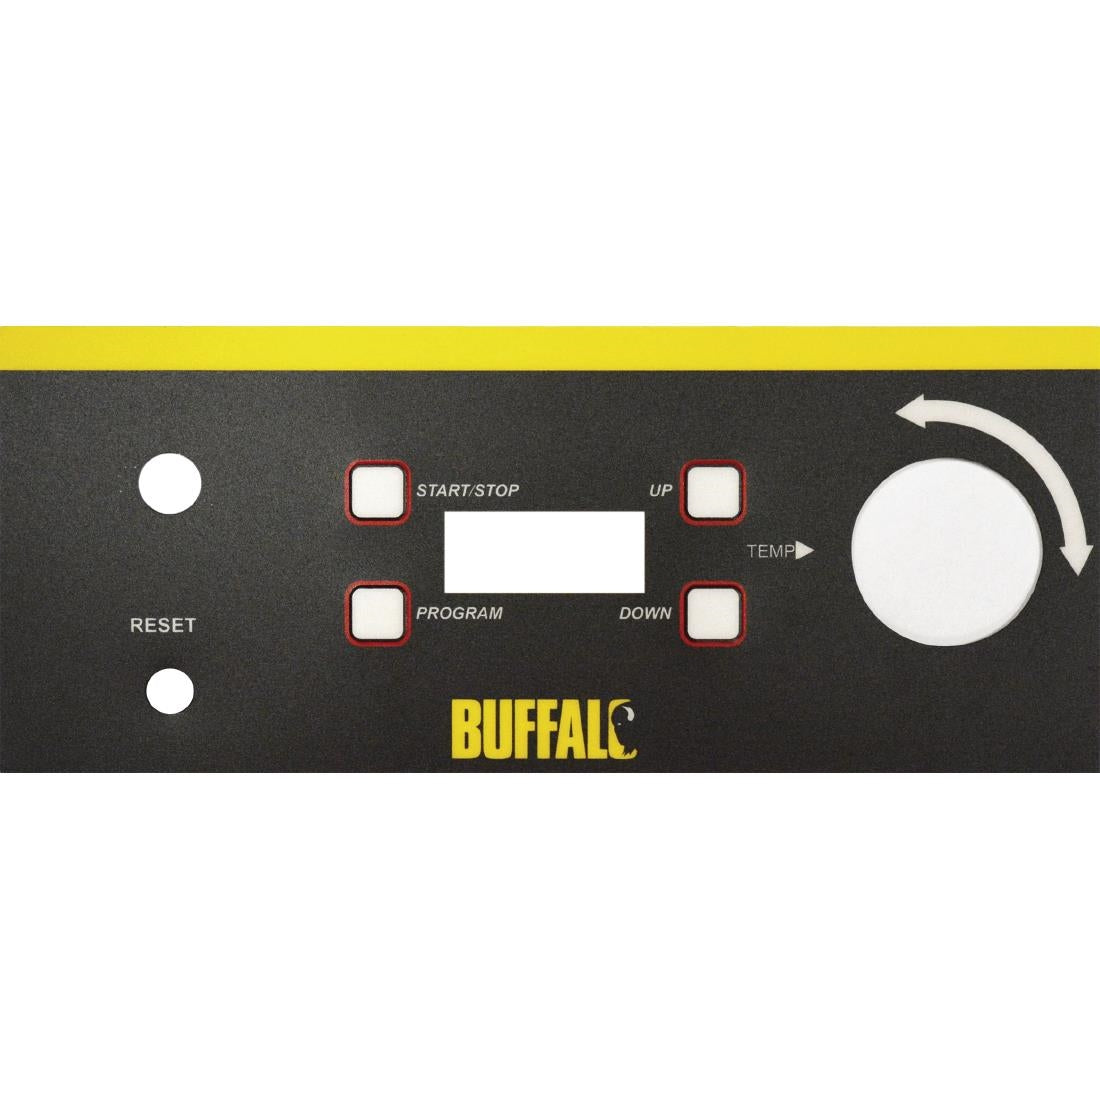 Buffalo Decal Sticker AF491 JD Catering Equipment Solutions Ltd